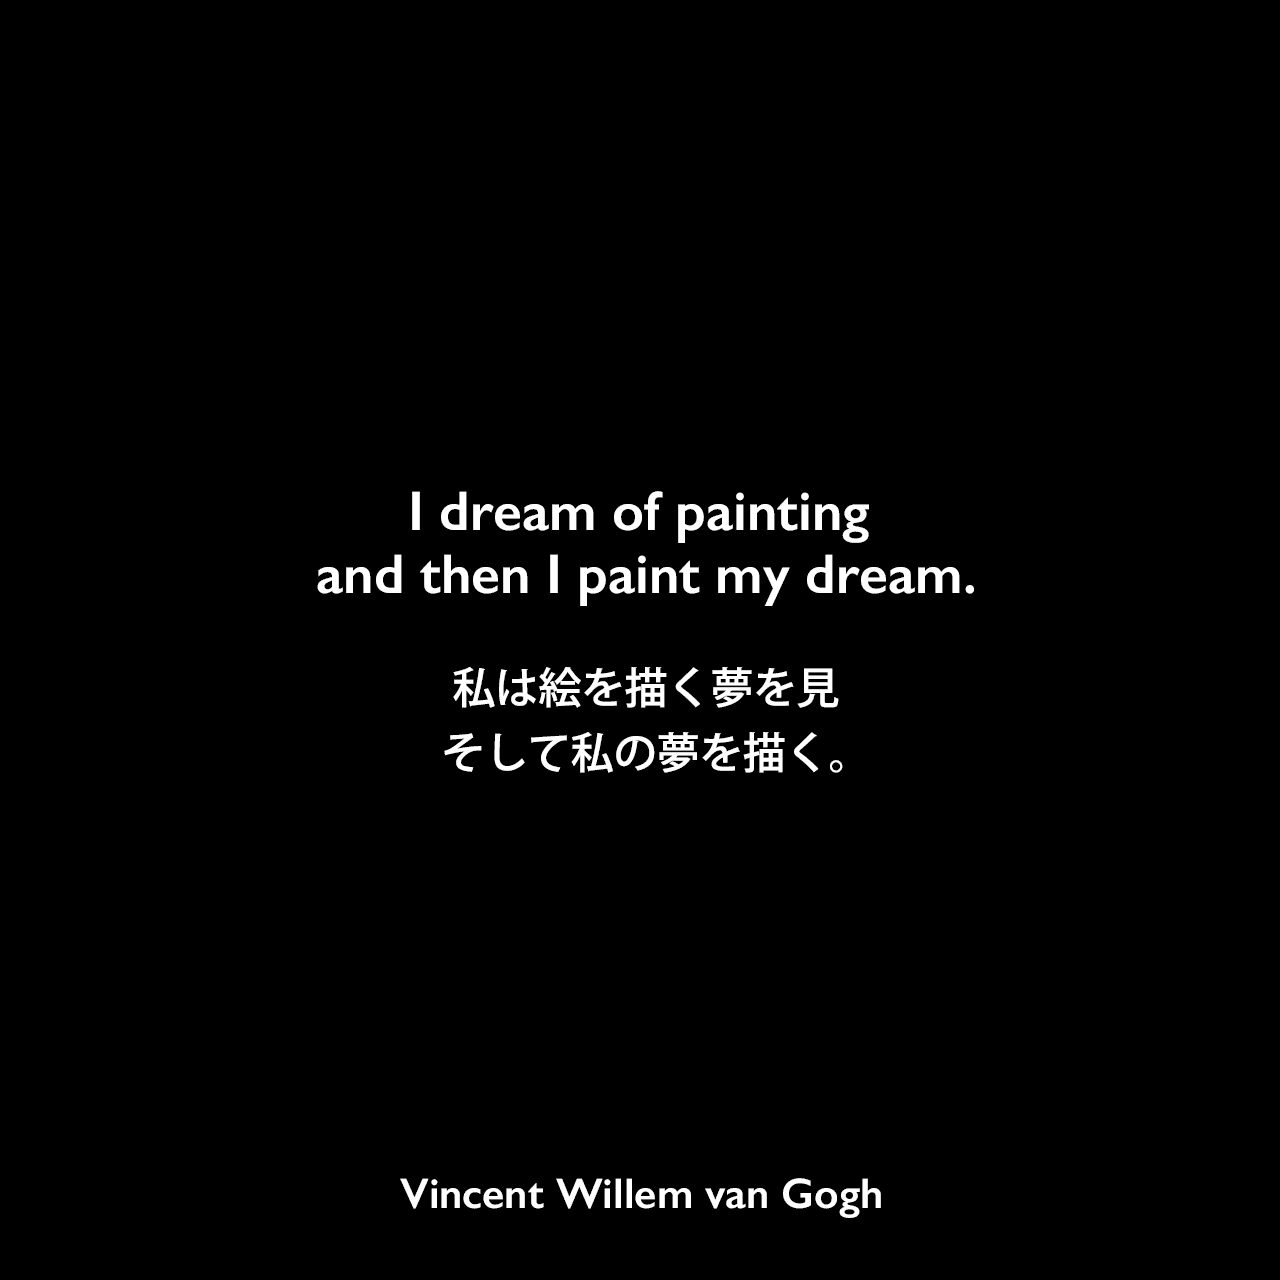 I dream of painting and then I paint my dream.私は絵を描く夢を見、そして私の夢を描く。Vincent Willem van Gogh